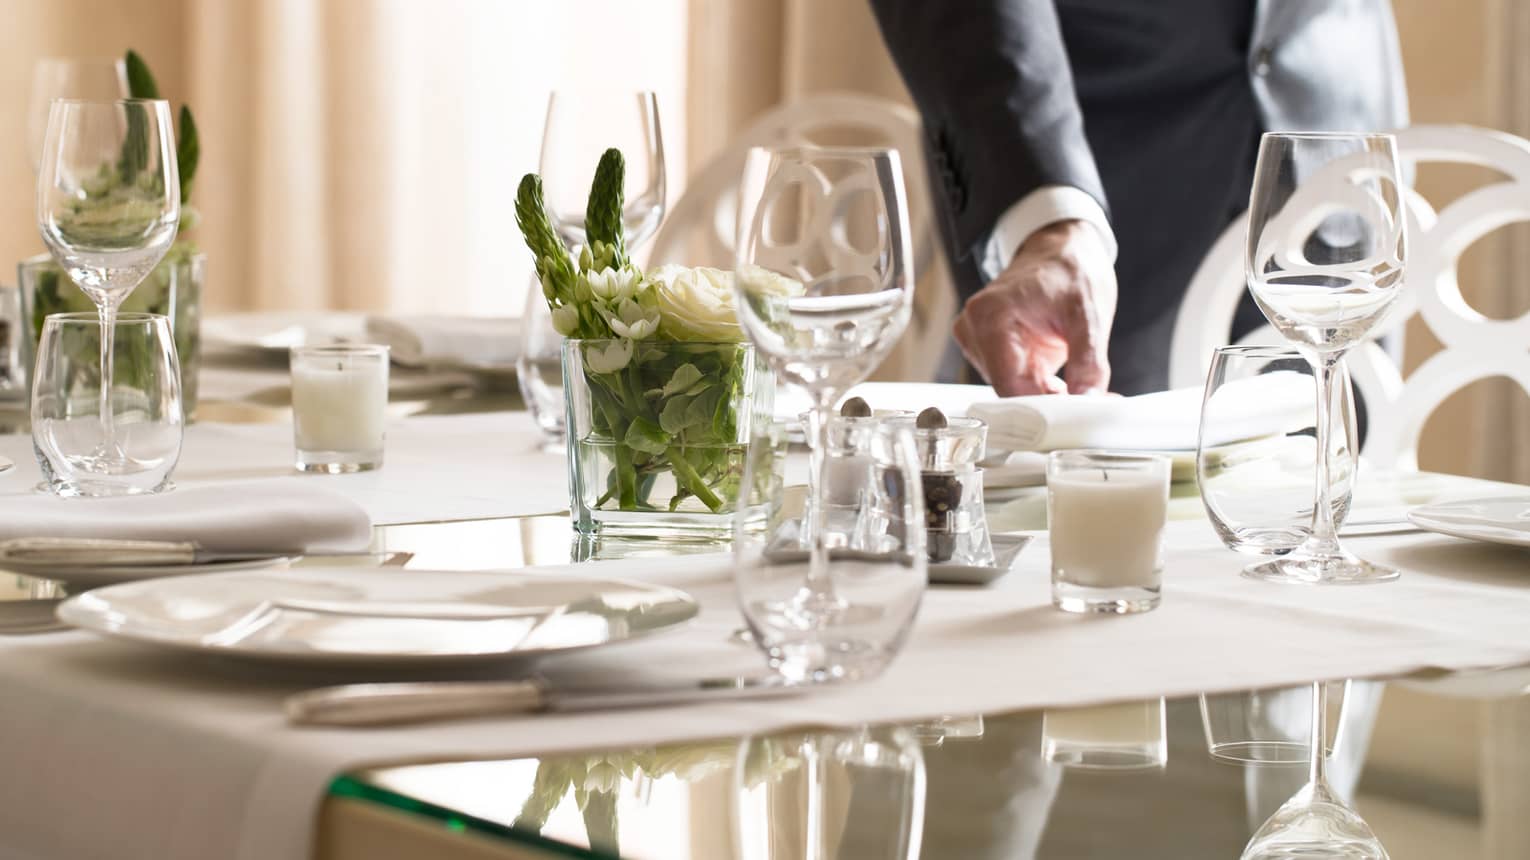 Hotel staff places napkin on small, elegant dining table in sunny room